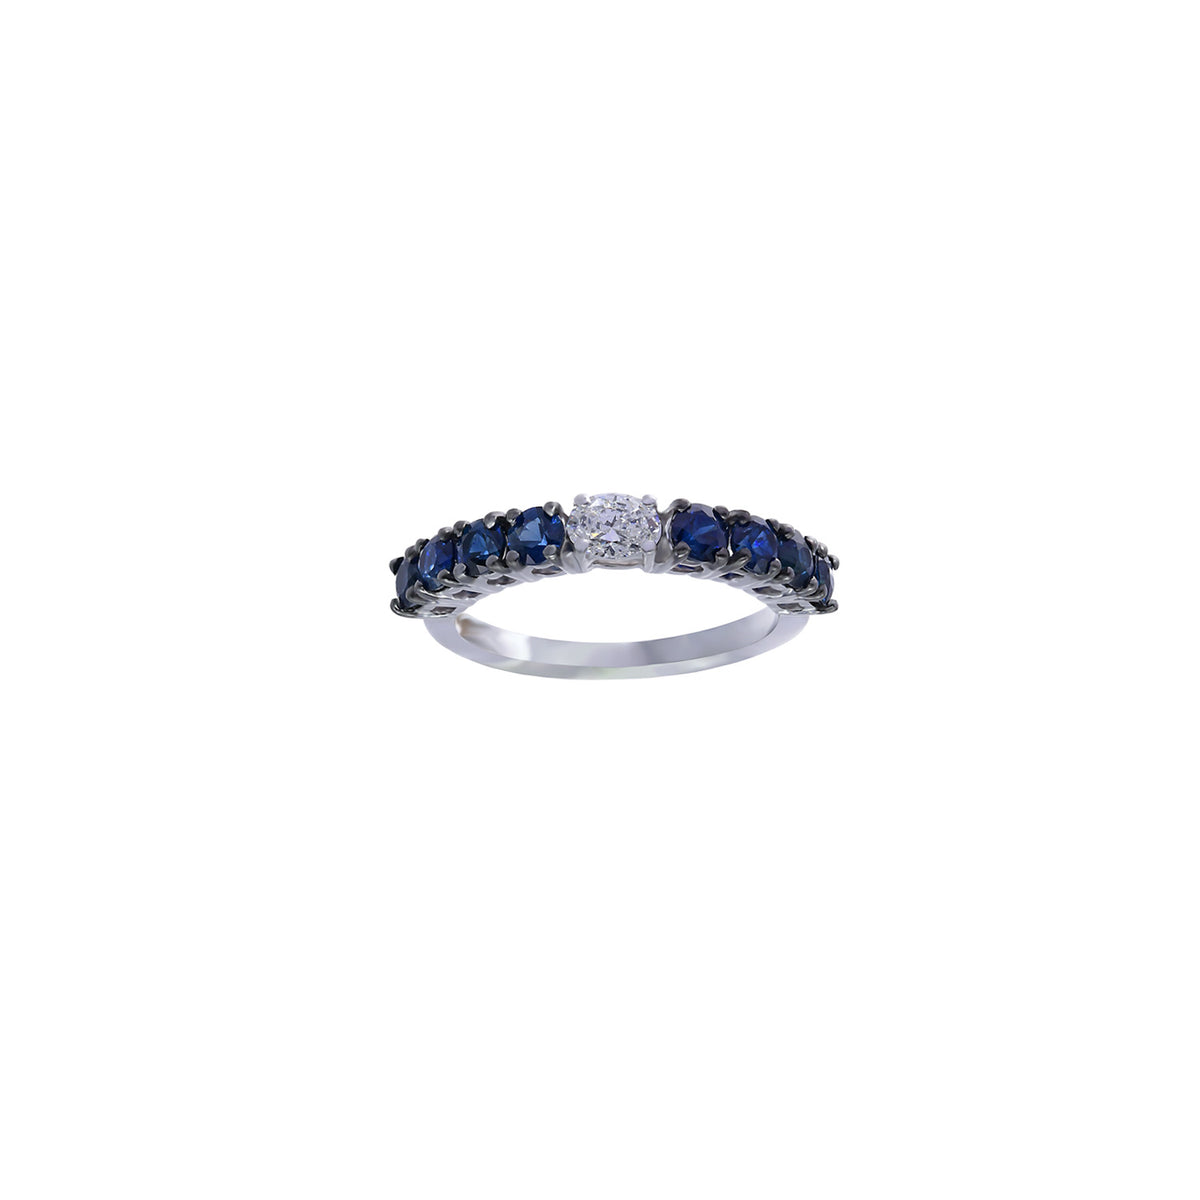 Oval diamond ring. Sapphire ring. Diamond and sapphire ring. Eternity ring. 